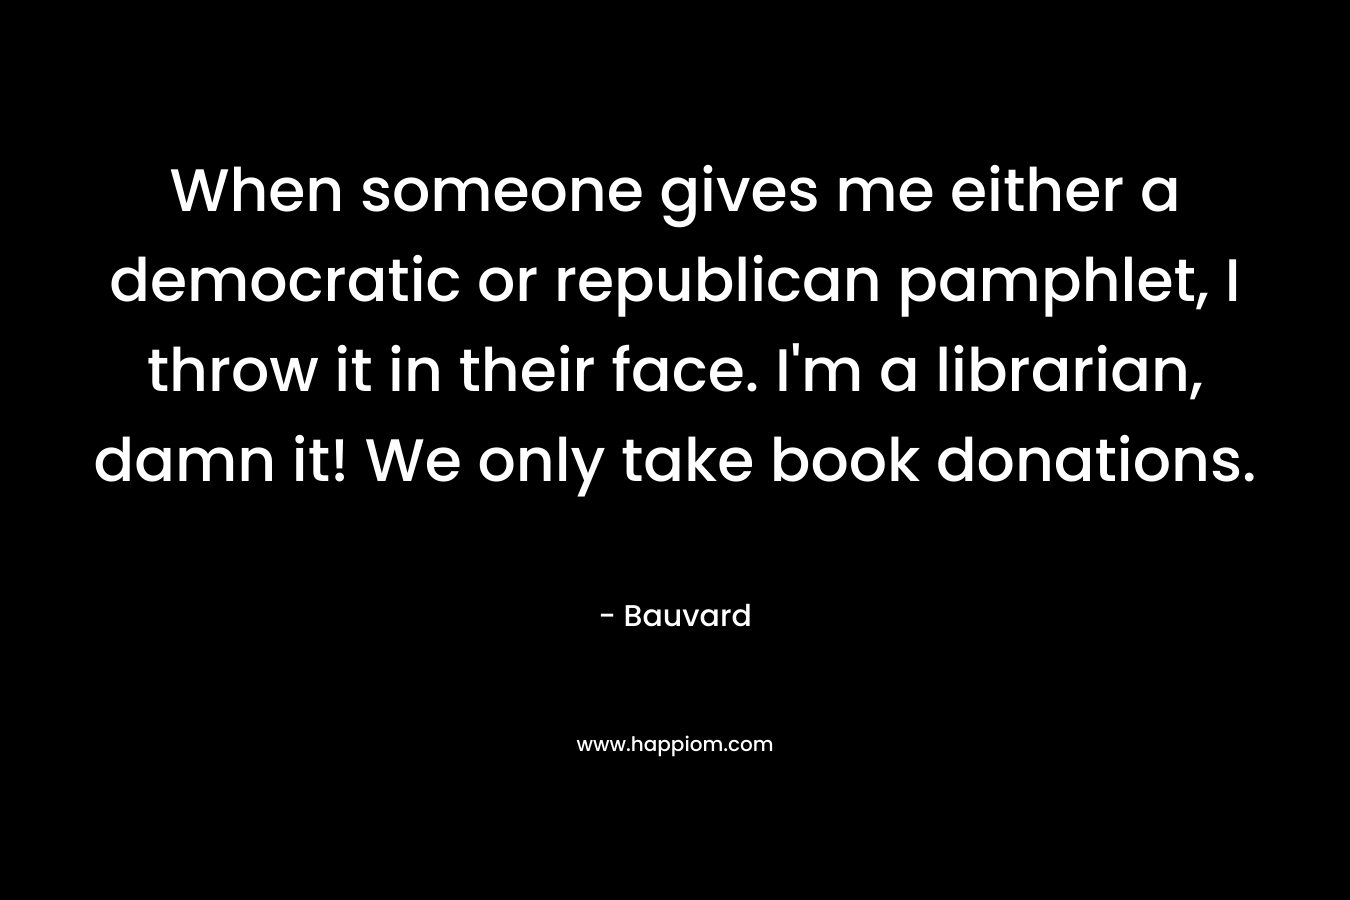 When someone gives me either a democratic or republican pamphlet, I throw it in their face. I'm a librarian, damn it! We only take book donations.